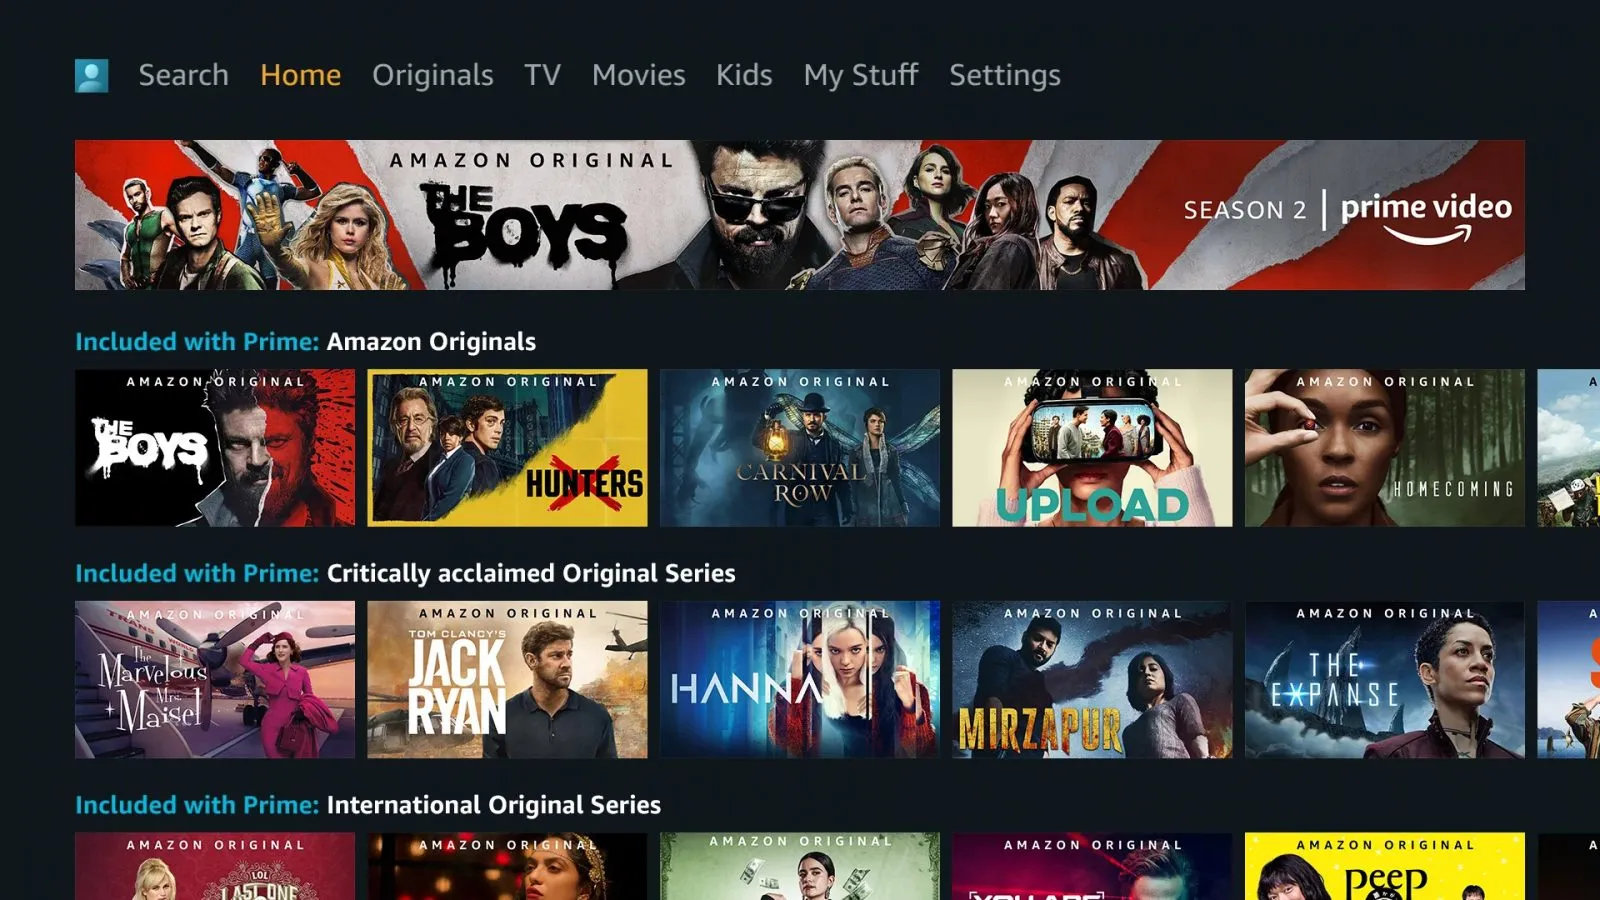 February 2023 Amazon Prime Video Releases What's New on the Streaming